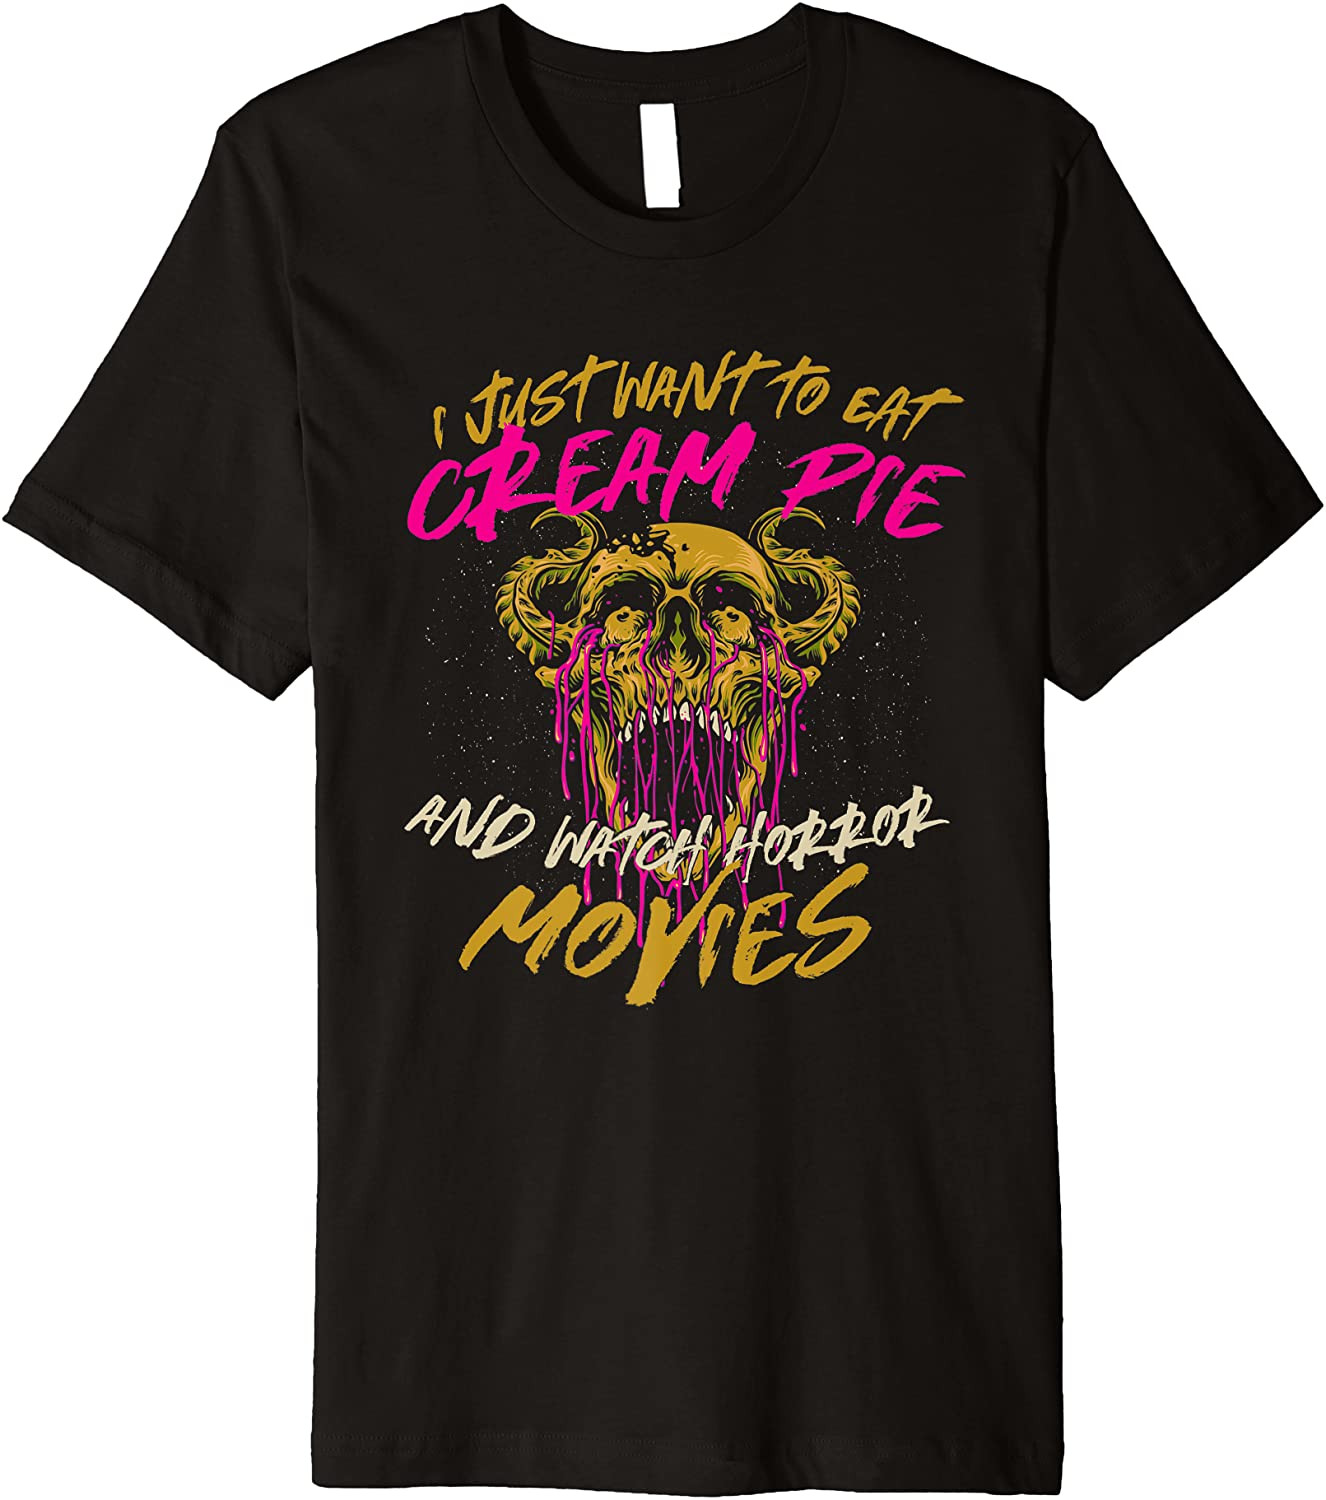 Eat Cream Pie And Watch Horror Movies Comfort Food Pie Lover T-Shirt